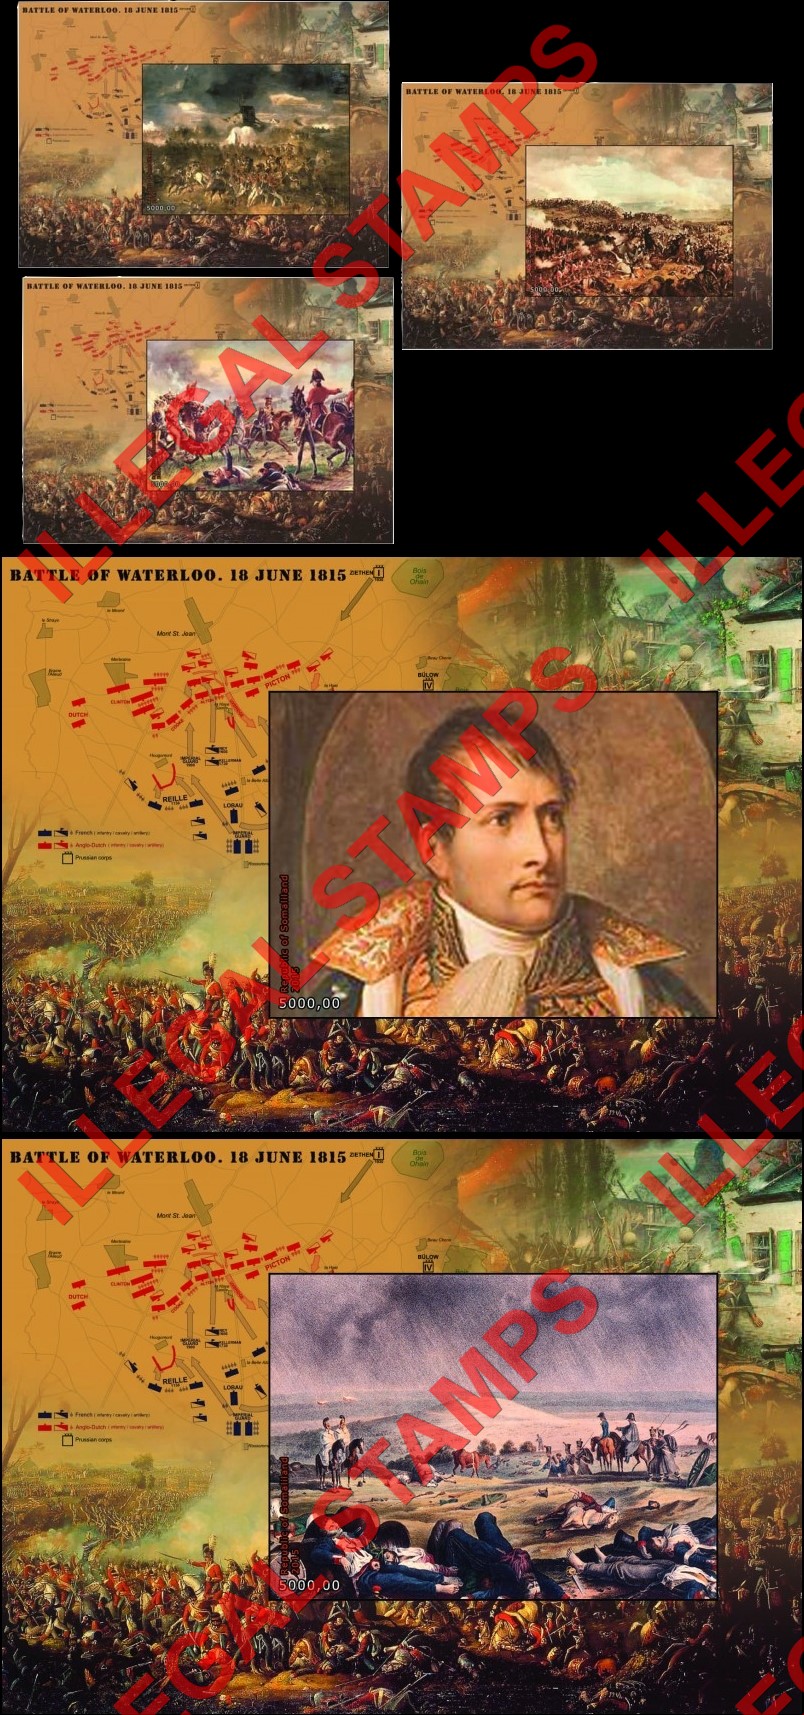 Somaliland 2015 Battle of Waterloo Illegal Stamp Souvenir Sheets of 1 (Part 2)